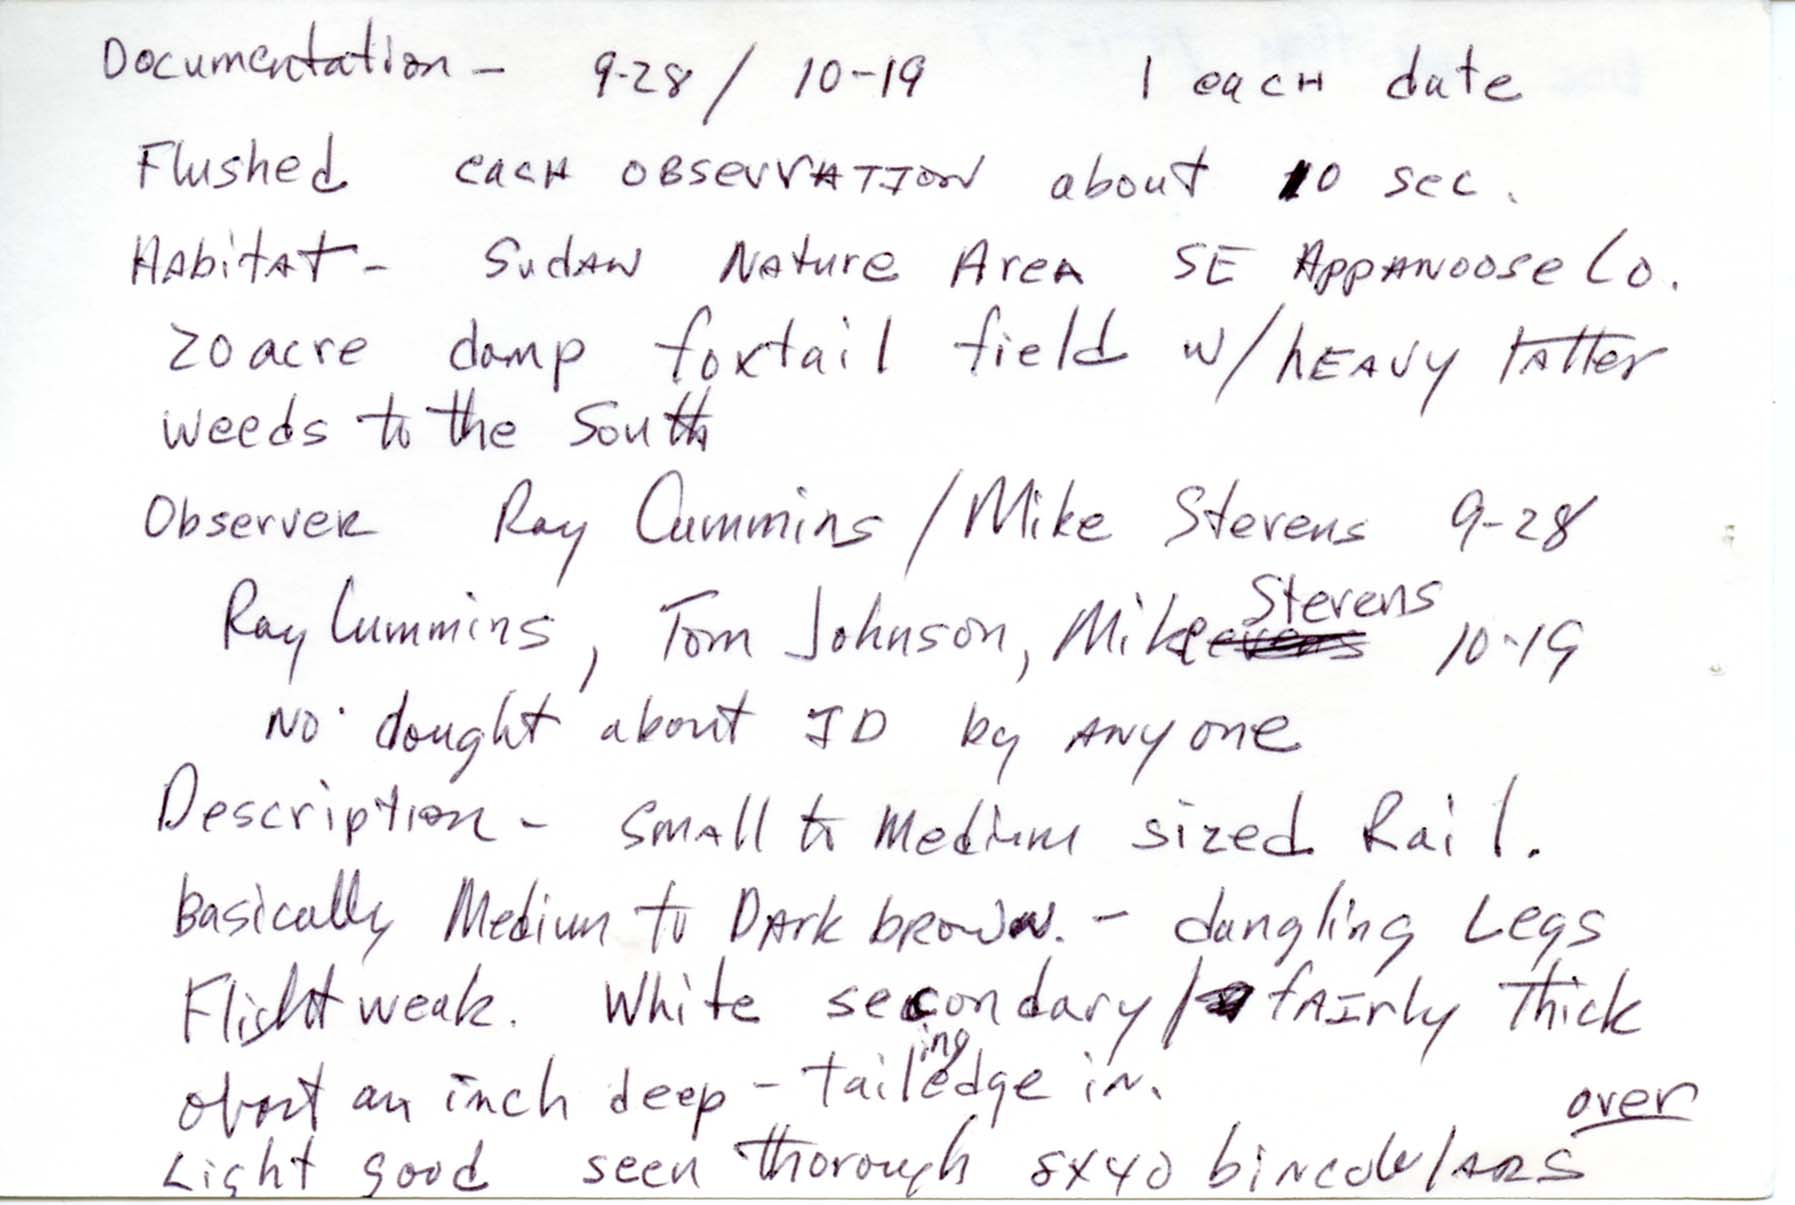 Field notes contributed by Raymond L. Cummins, fall 1997